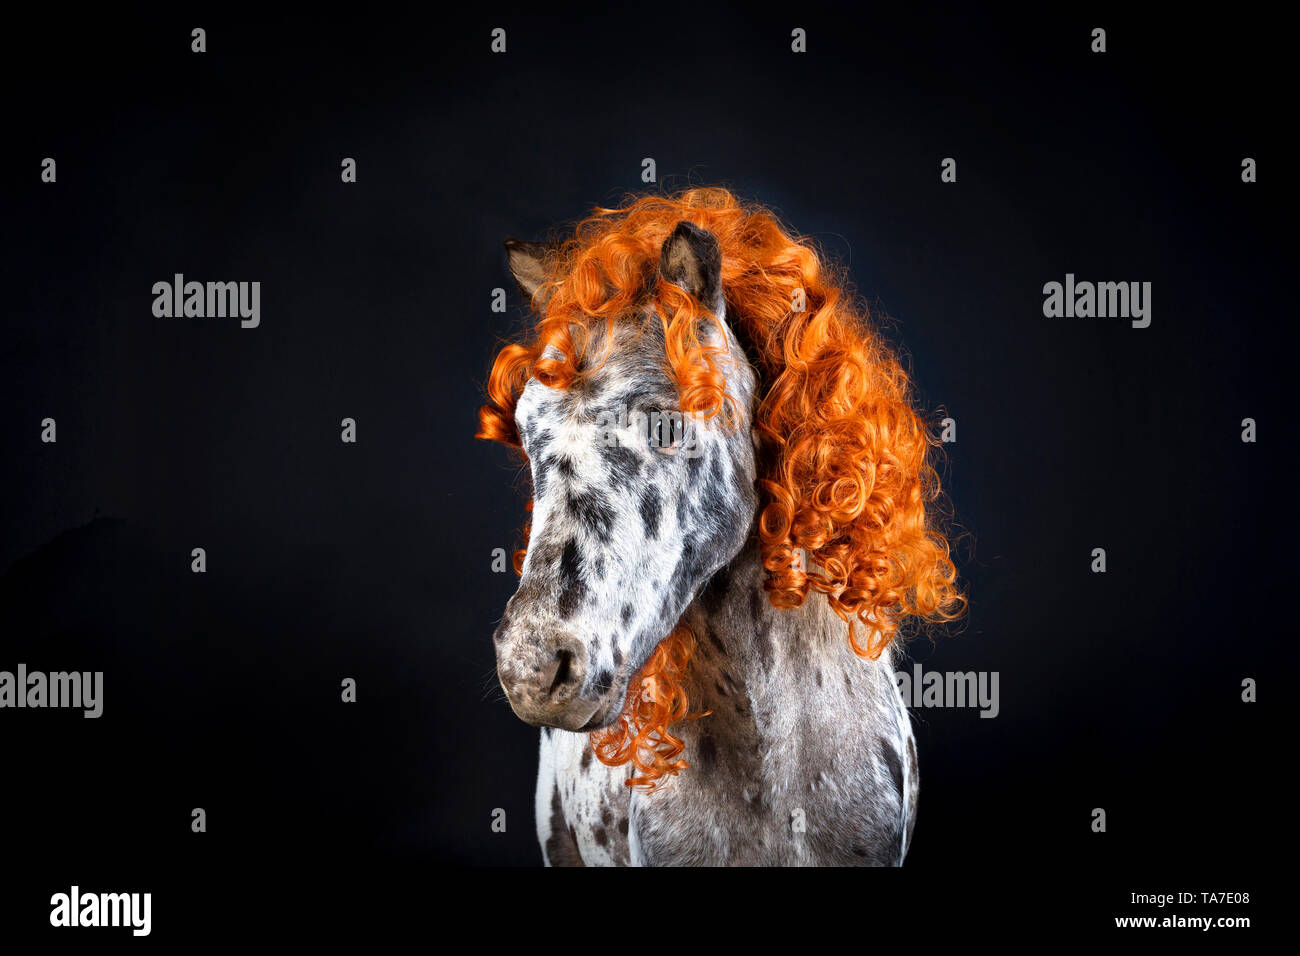 Miniature Appaloosa. Portrait of adult horse, wearing curly wig. Studio picture against a black background. Germany Stock Photo